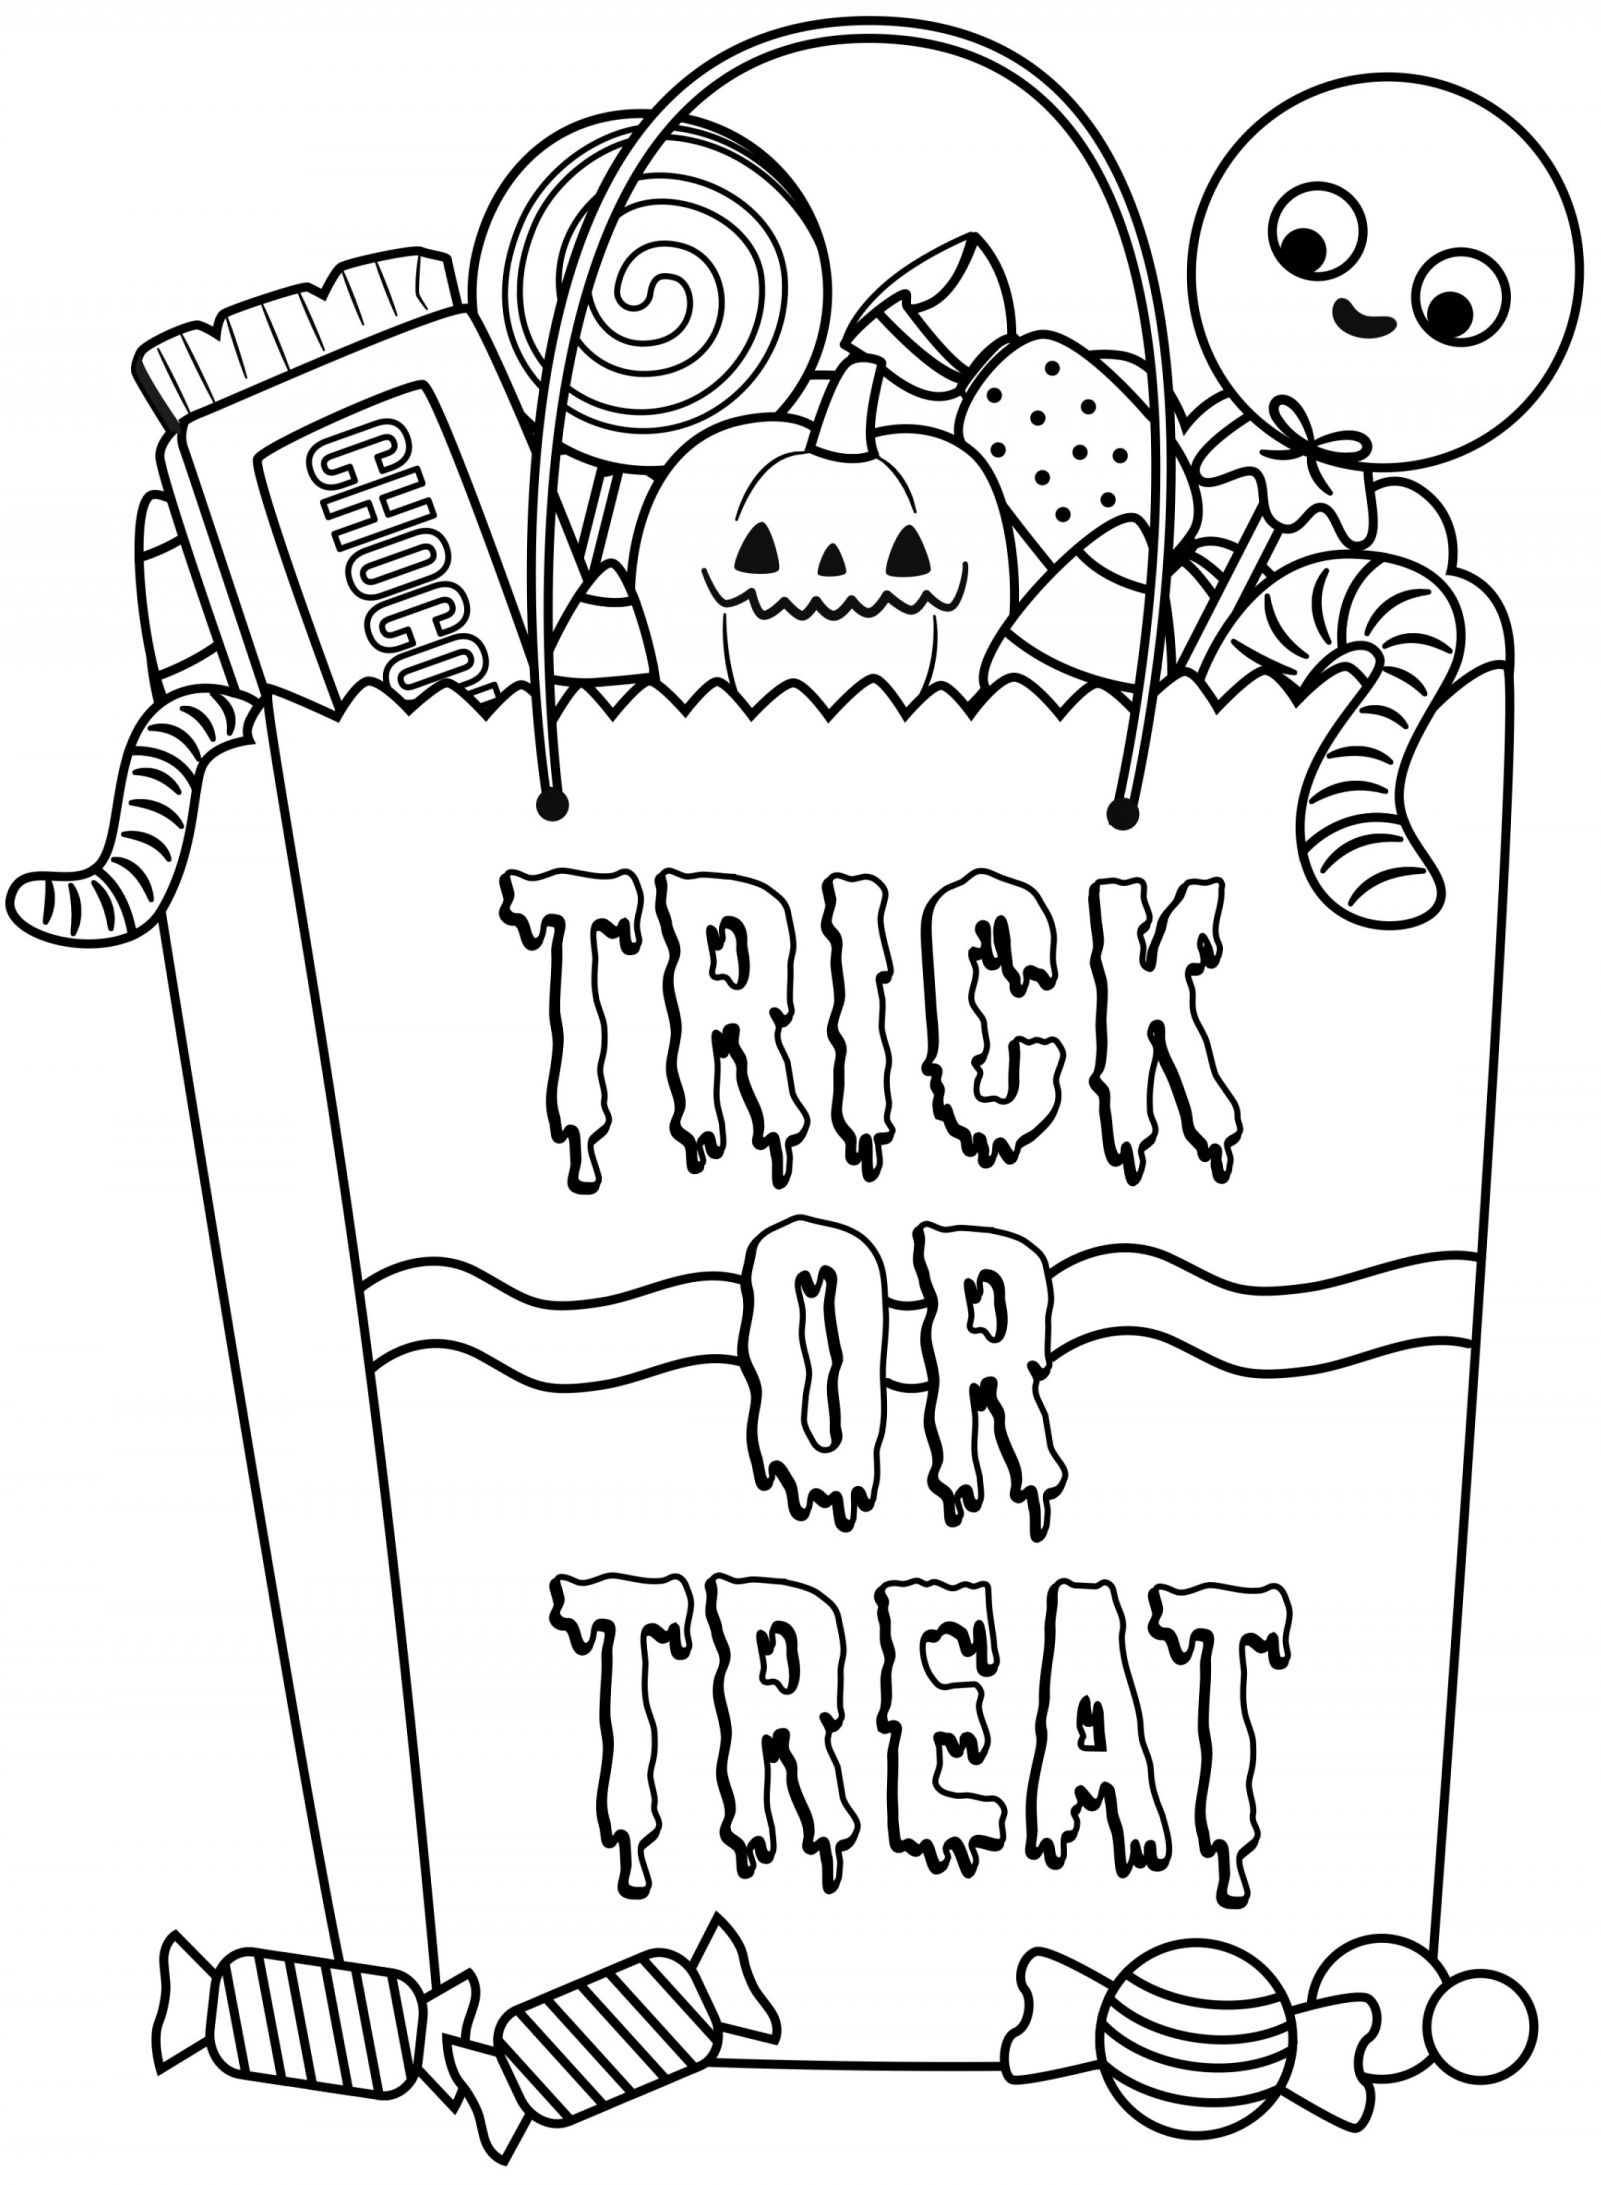 Halloween Candy Bag With Treats Coloring Page